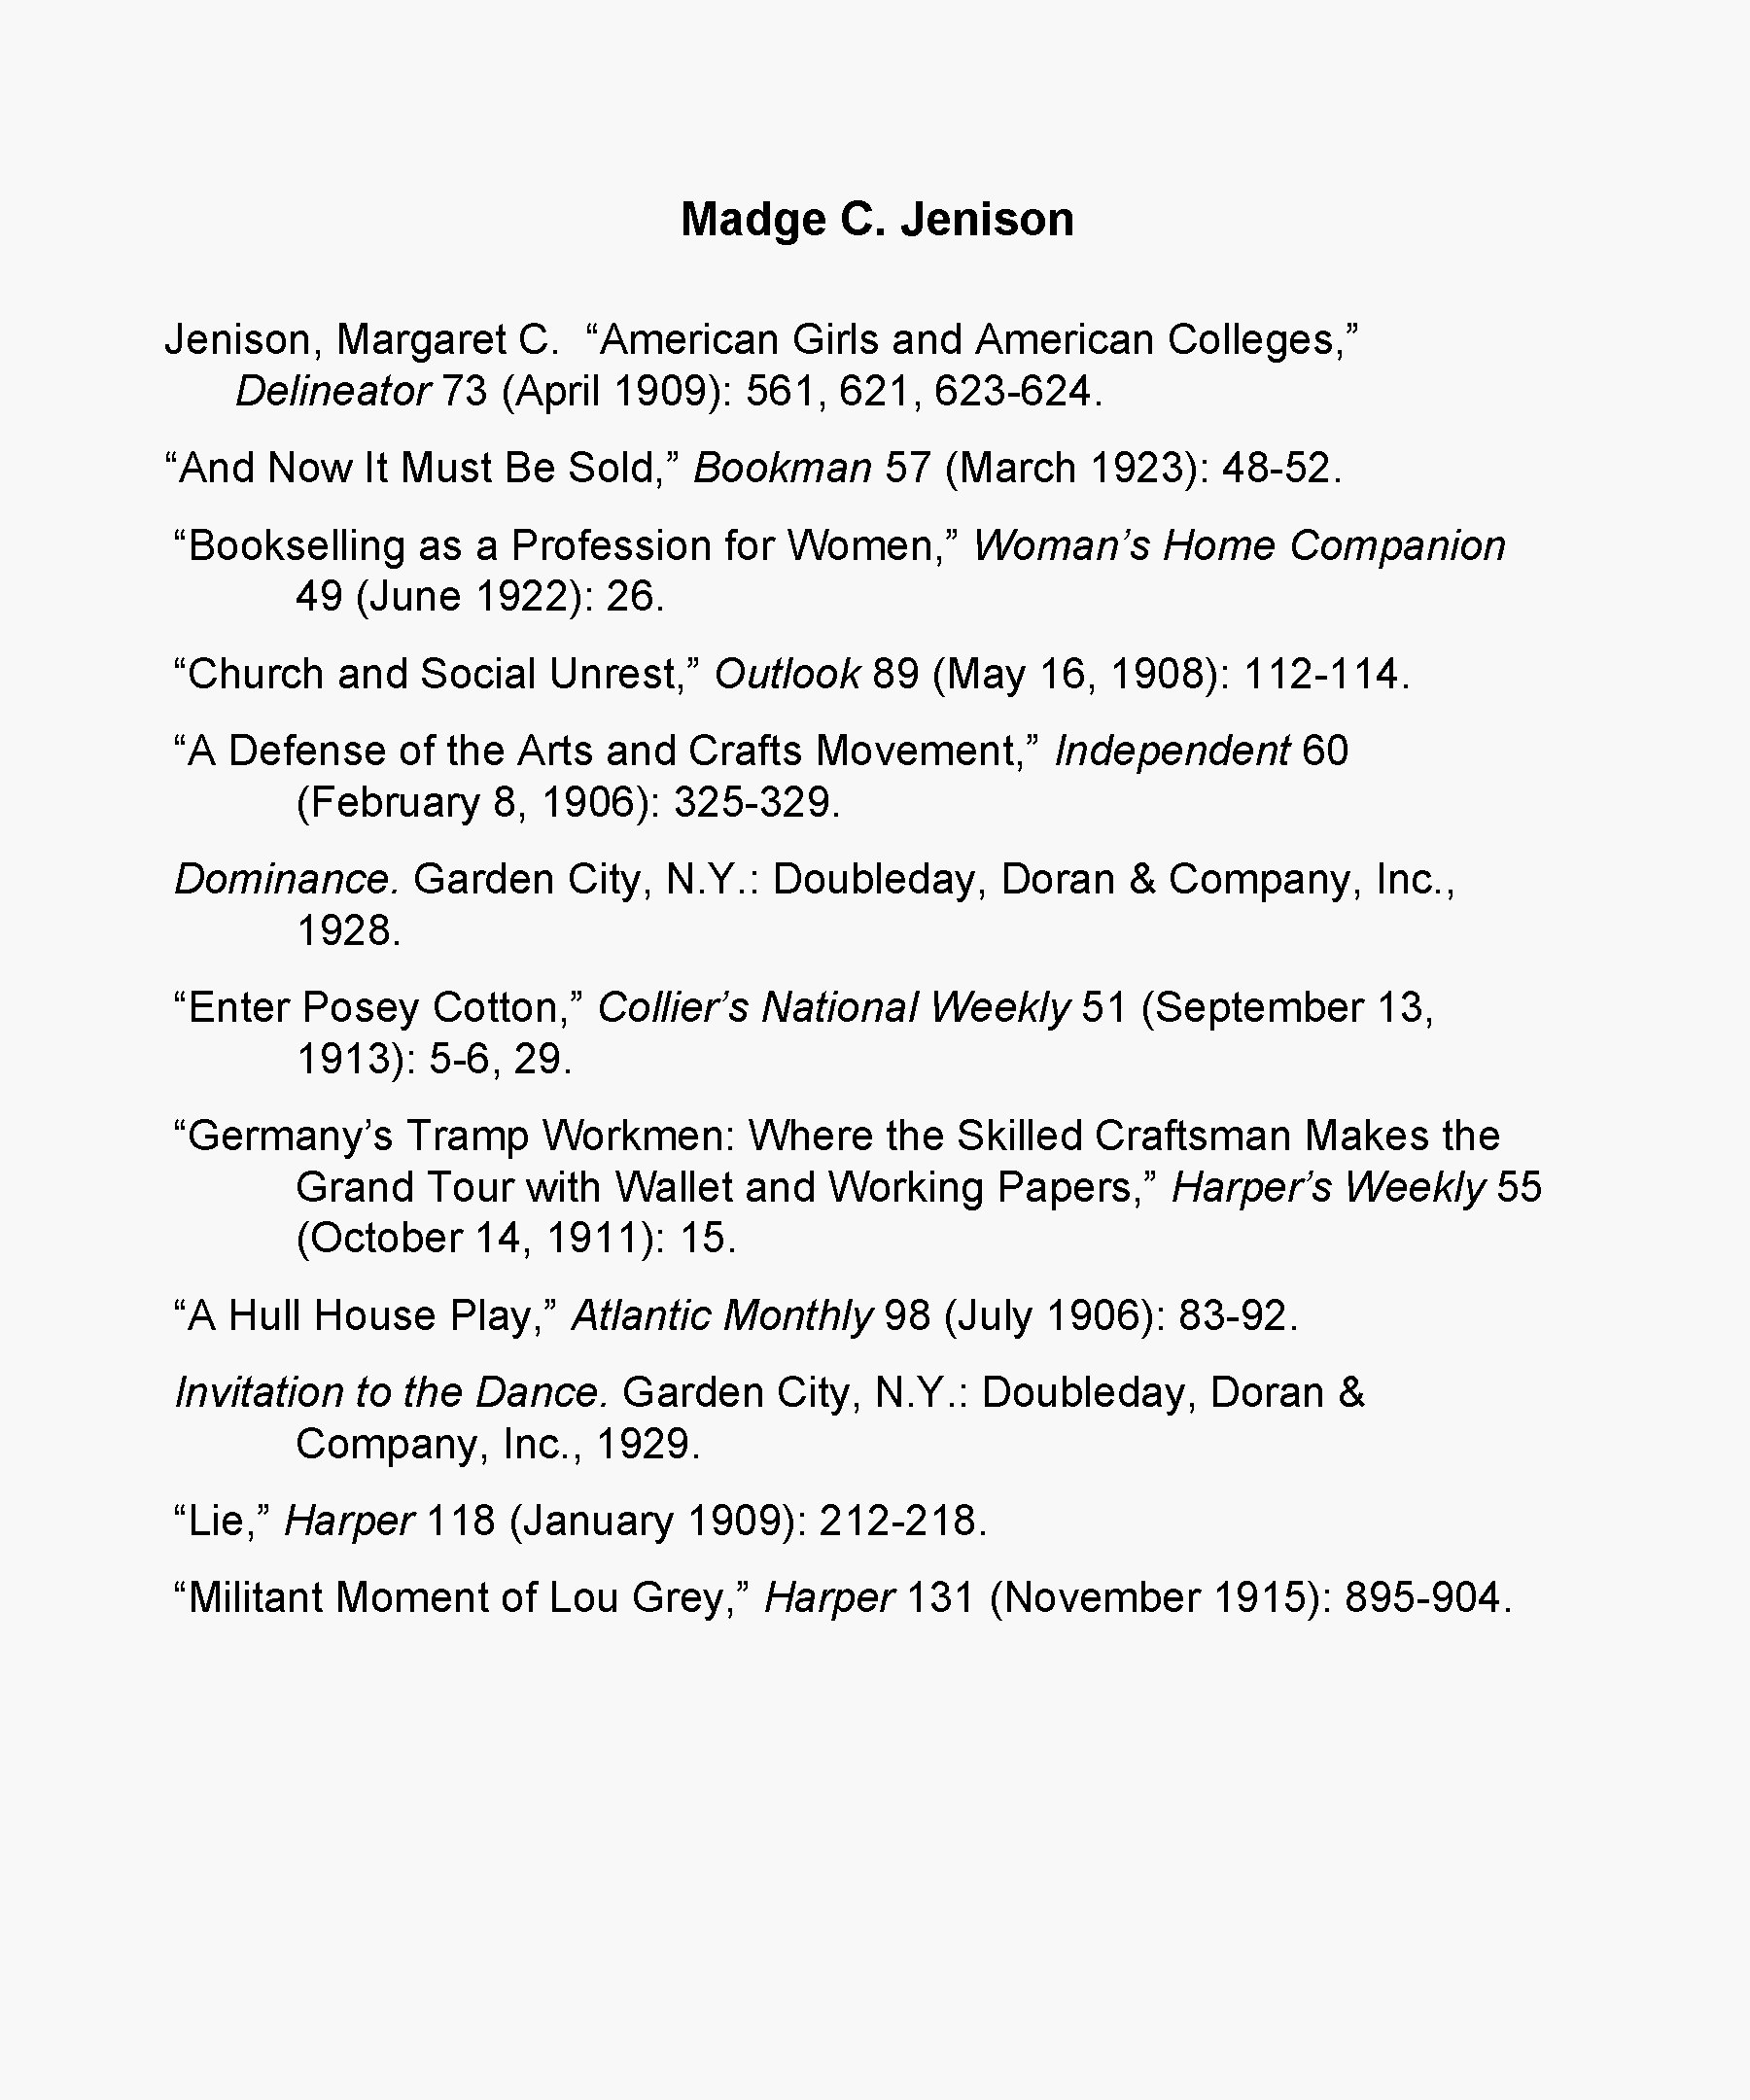 Madge C. Jenison, Margaret C. “American Girls and American Colleges, ” Delineator 73 (April